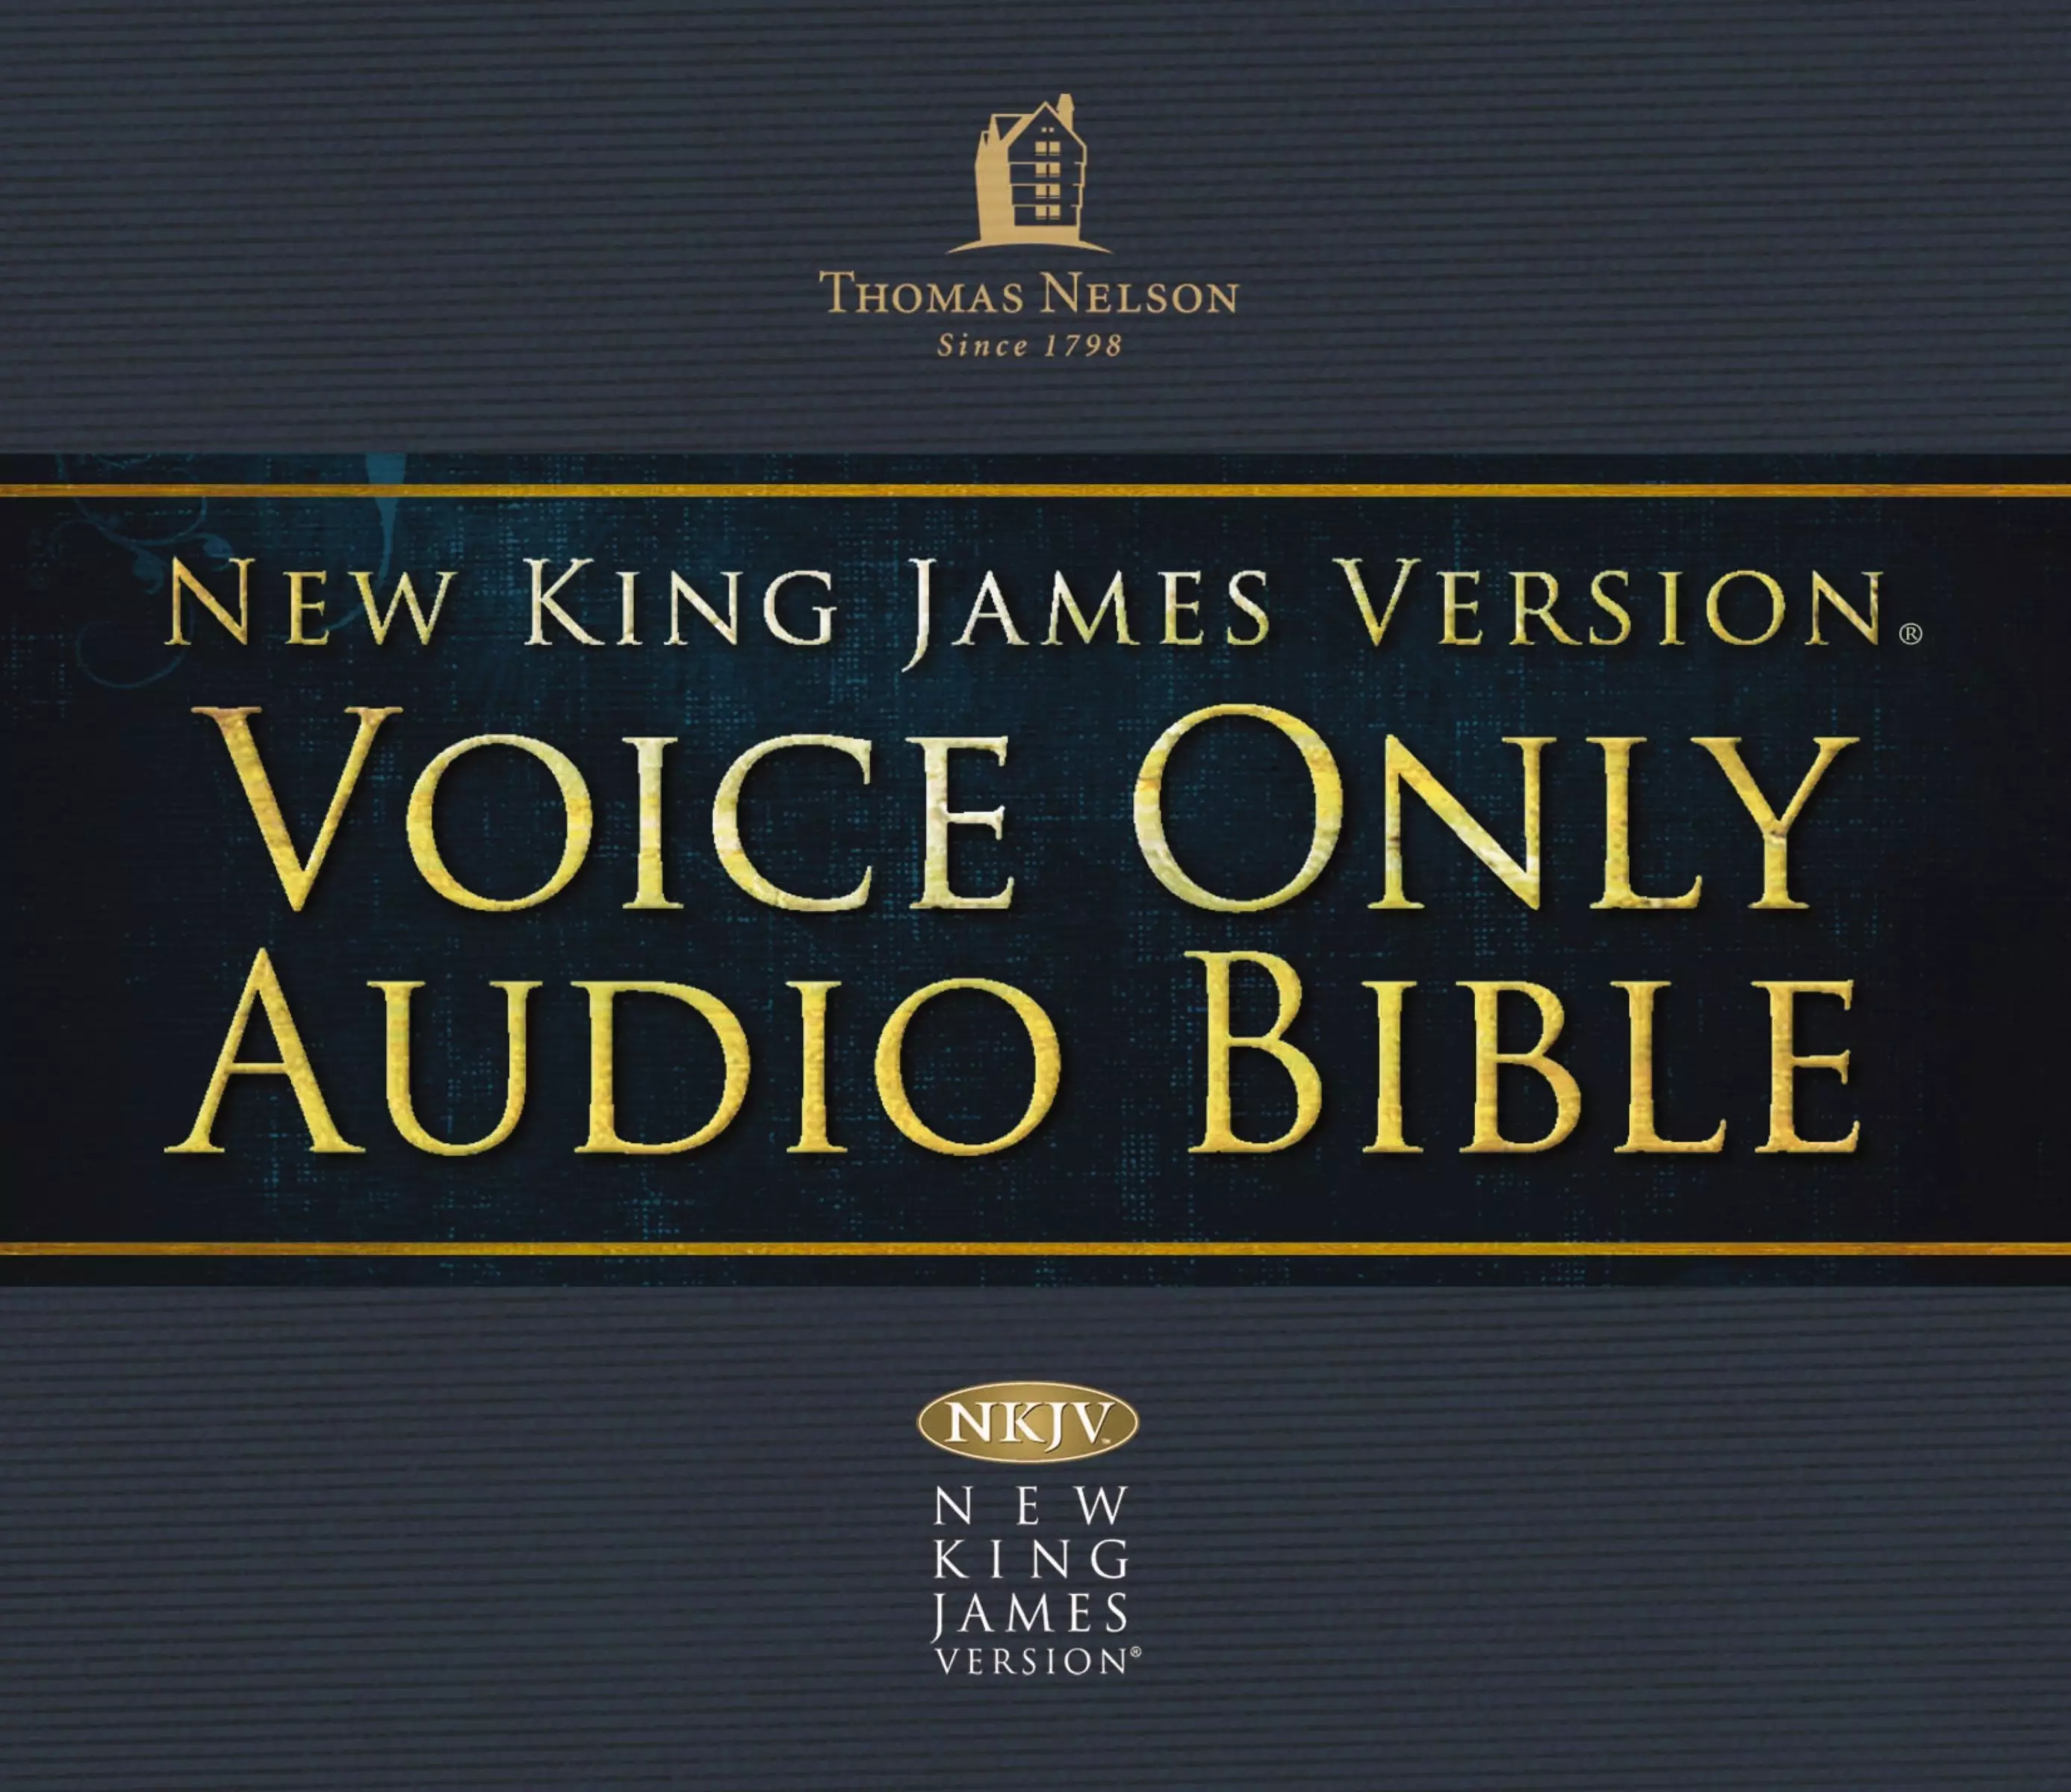 Voice Only Audio Bible - New King James Version, NKJV (Narrated by Bob Souer): (12) 1 Chronicles